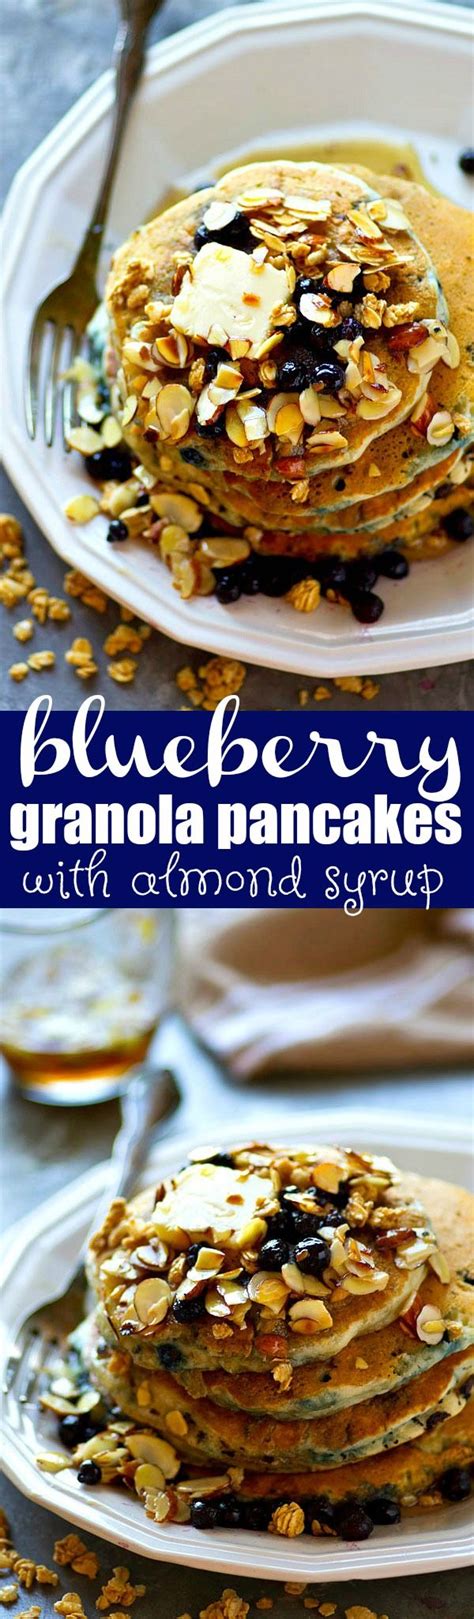 Blueberry Granola Pancakes With Almond Syrup Recipe